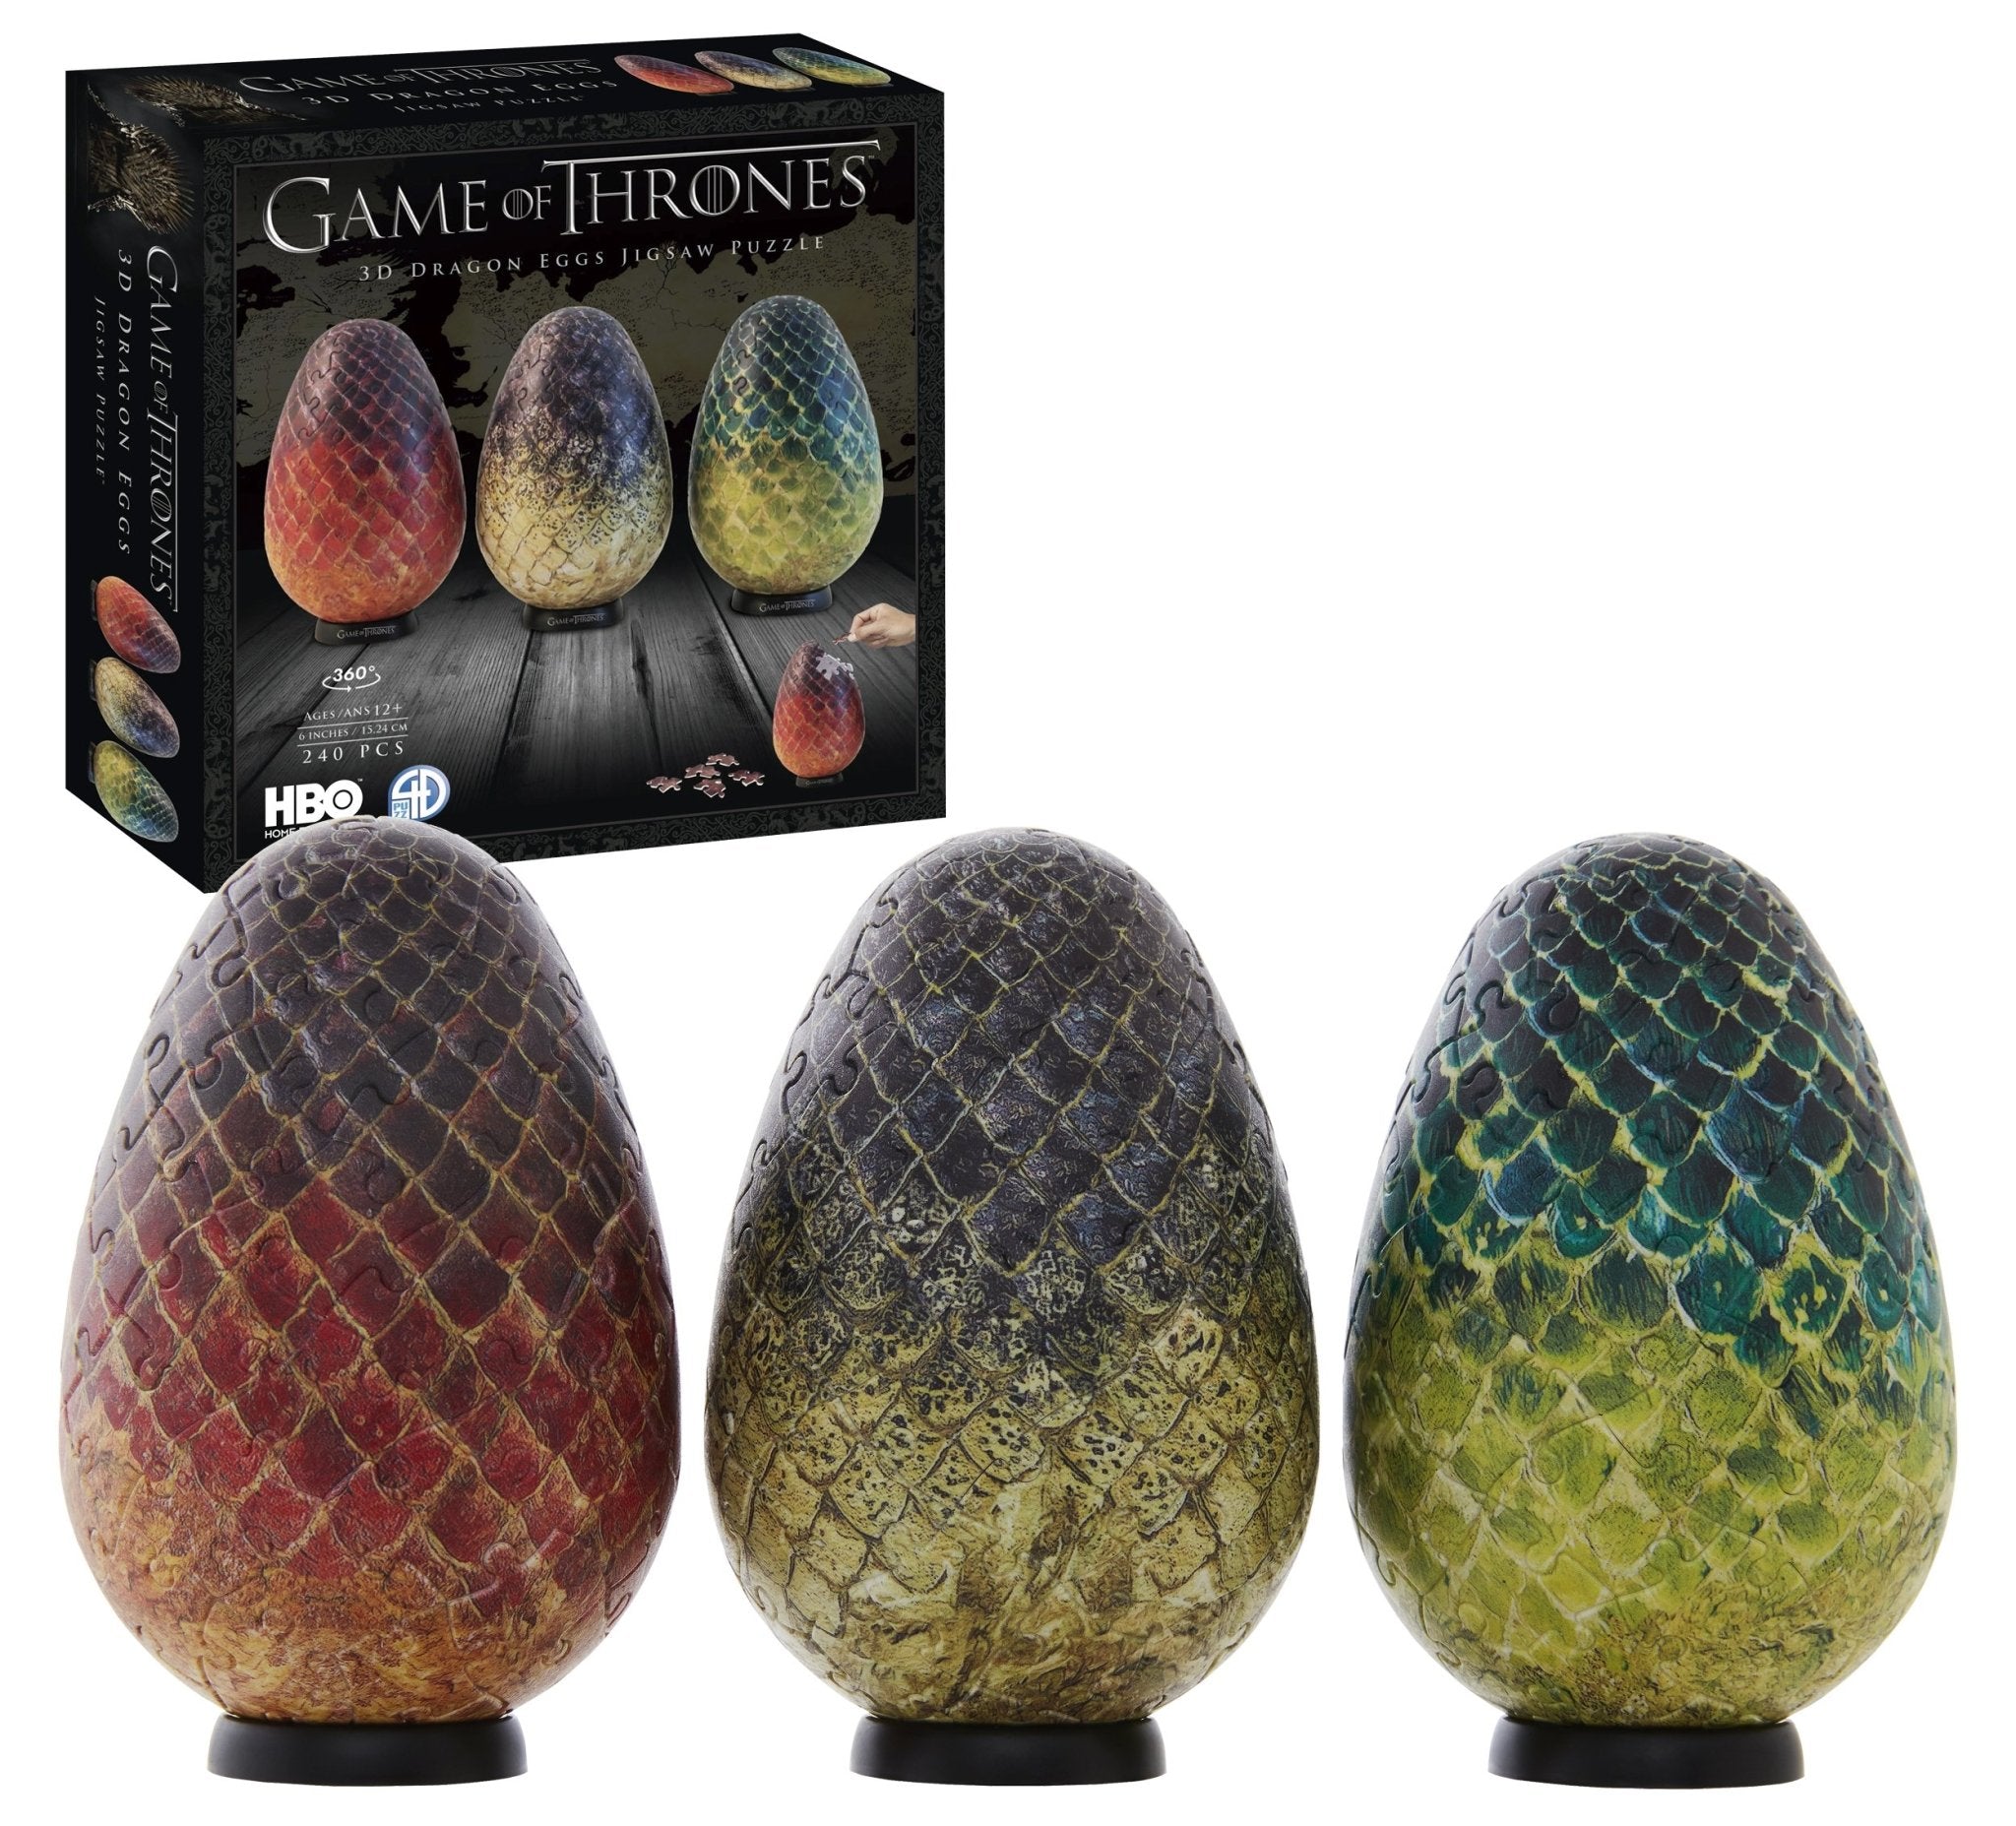 Puzzles - Game of Thrones 3D Dragon Eggs Jigsaw Puzzle | Event Horizon Hobbies CA